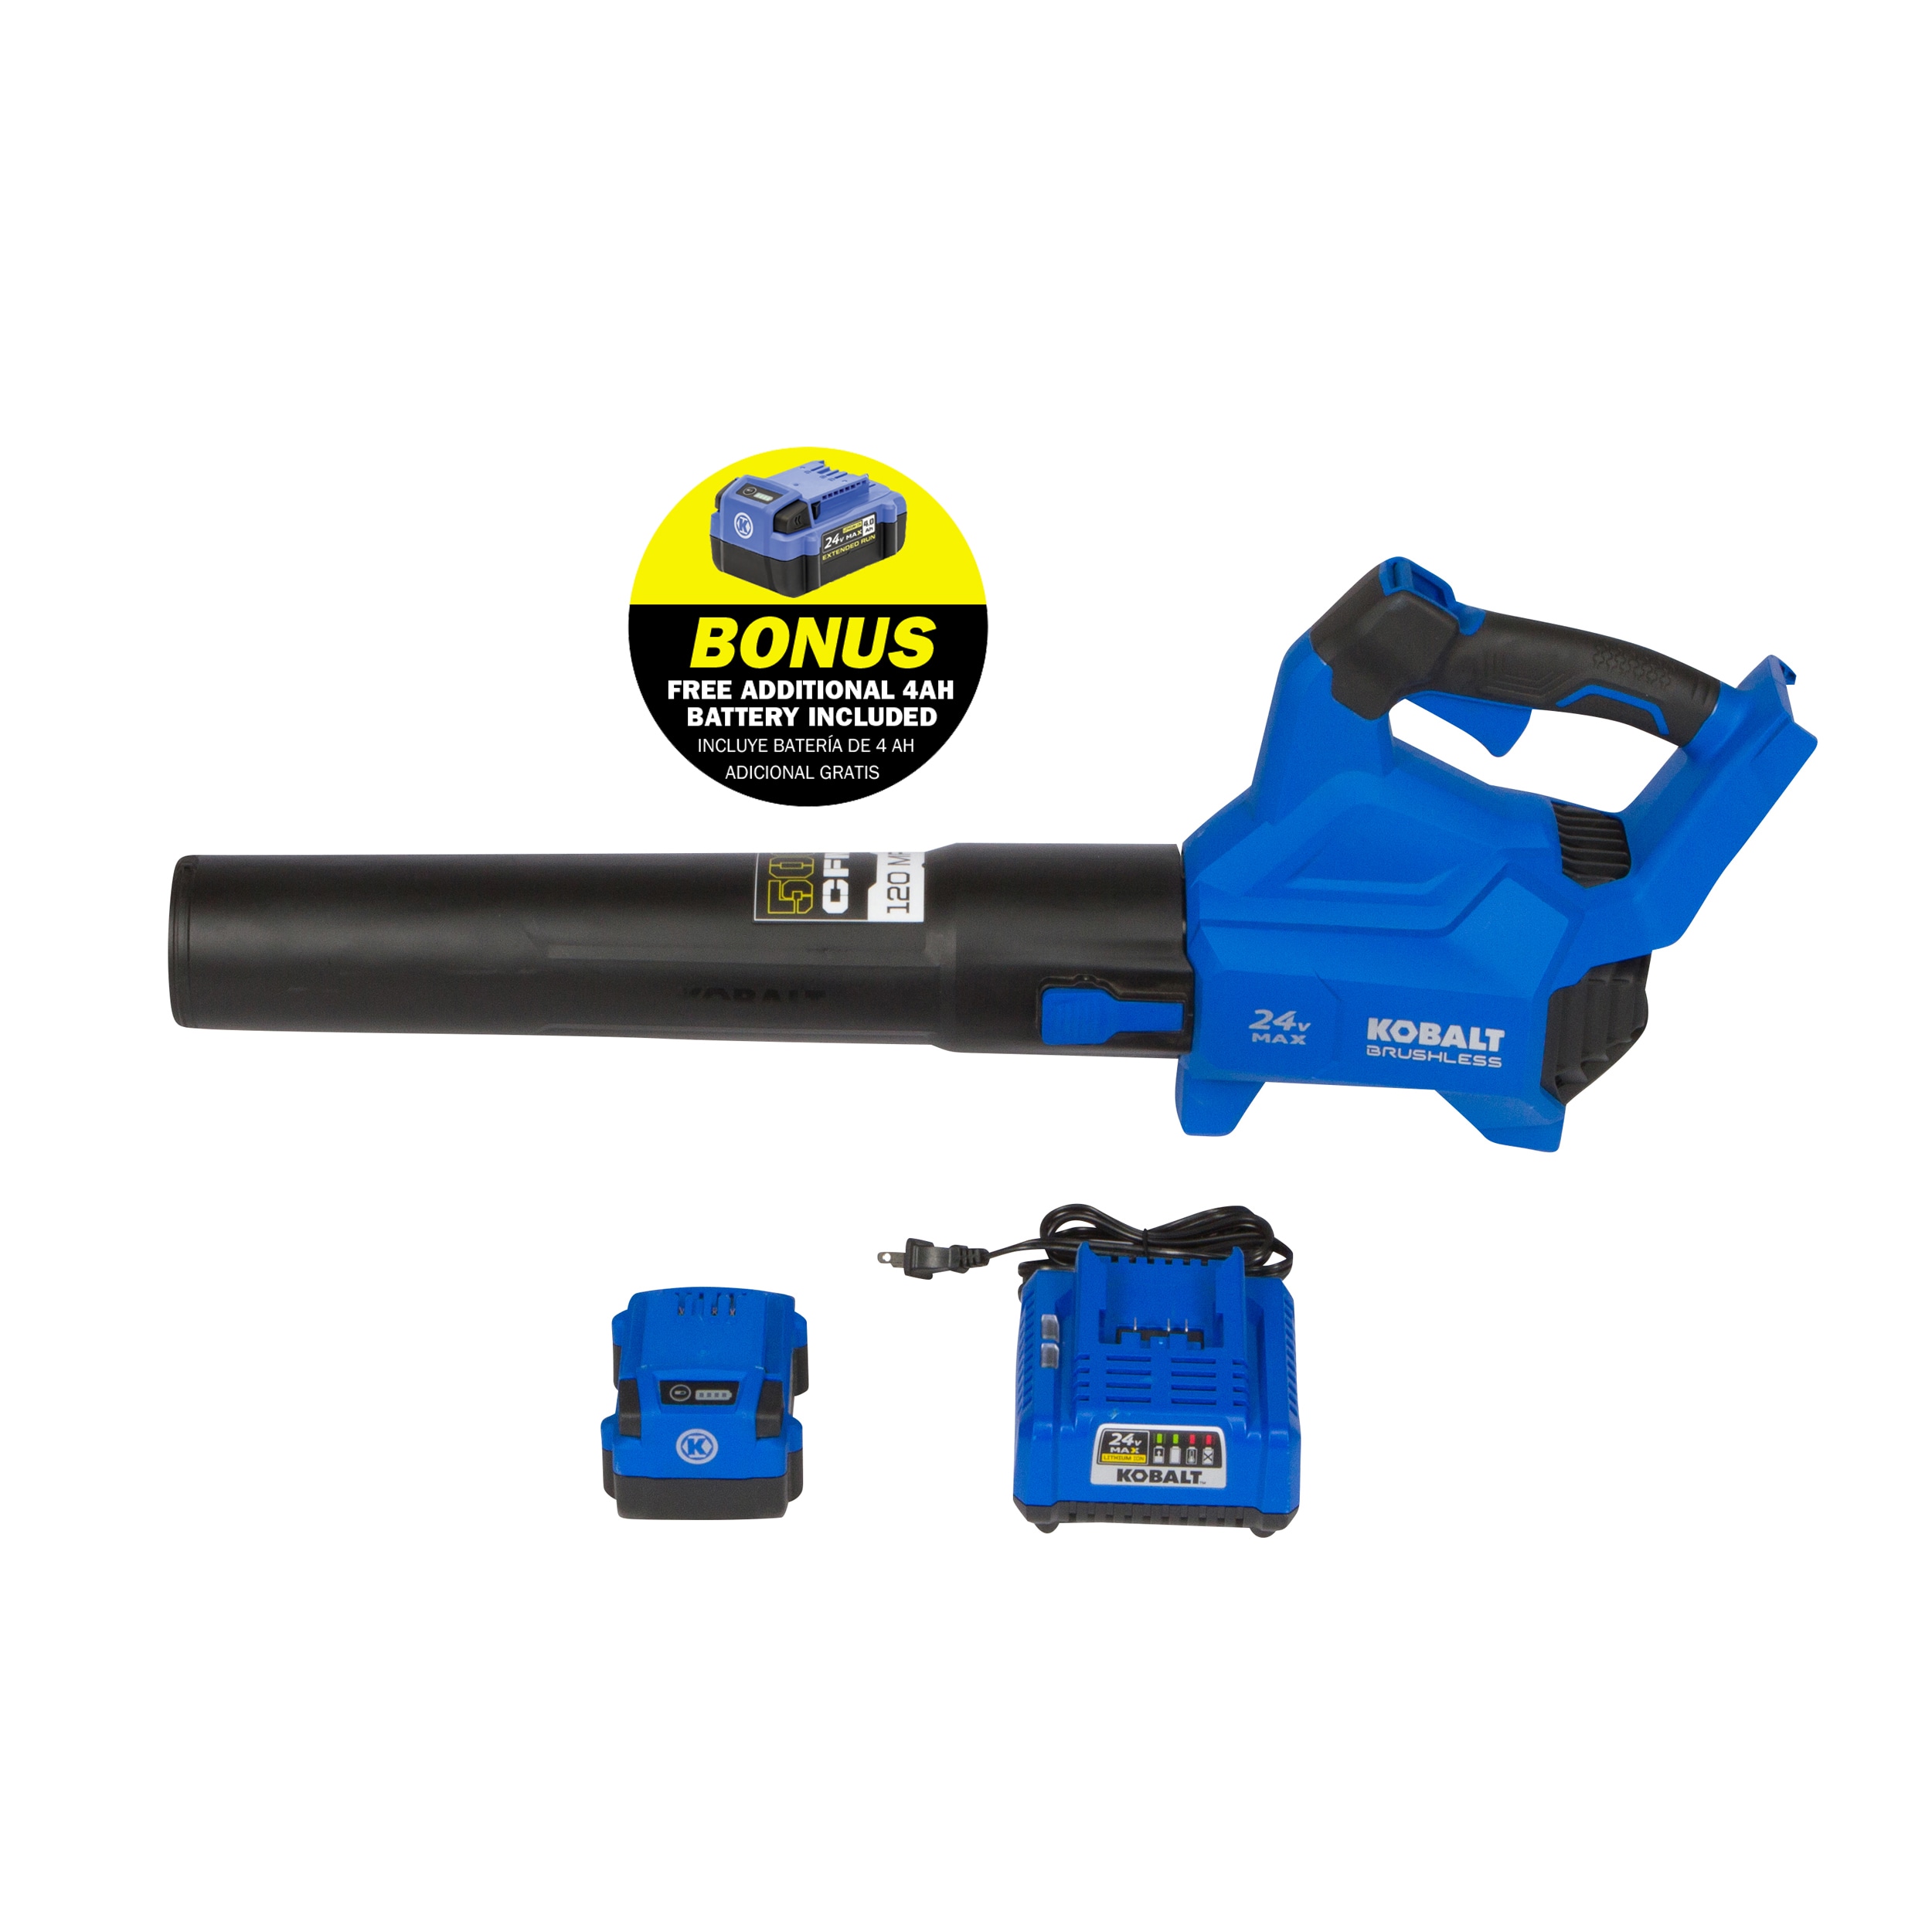 Image of Leaf blower from Kobalt at Lowes